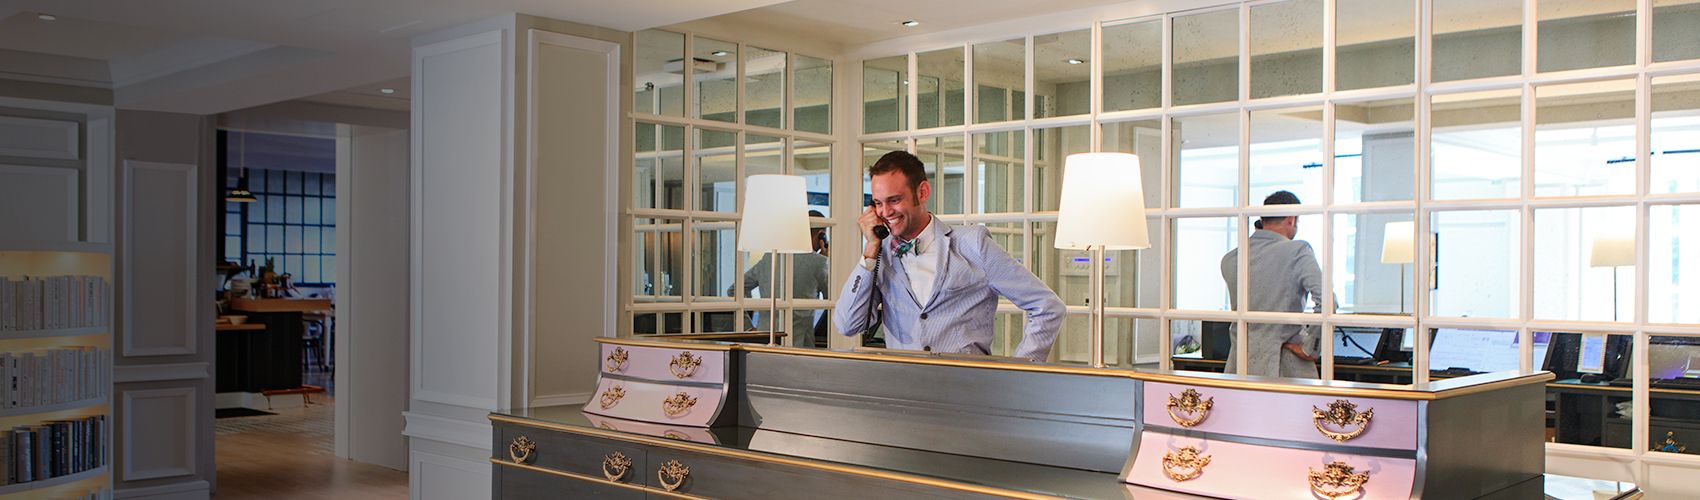 A hotel concierge taking calls at the front desk